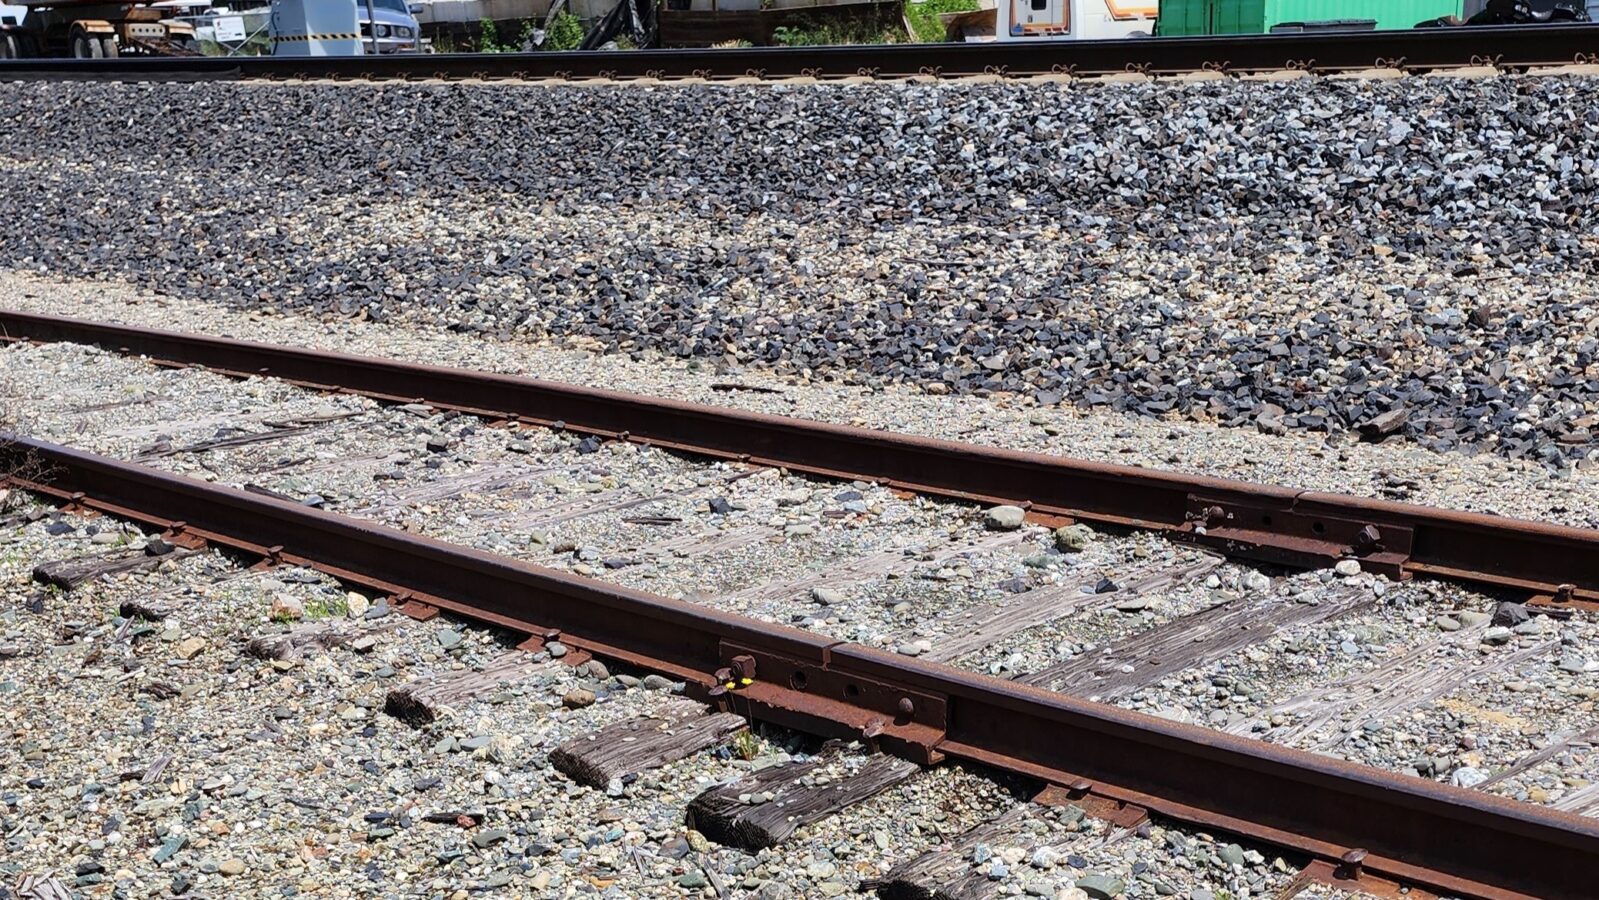 A prototype mainline ballast shoulder next to a team track spur. Note the lighter sub ballast color showing through the actual track ballast.